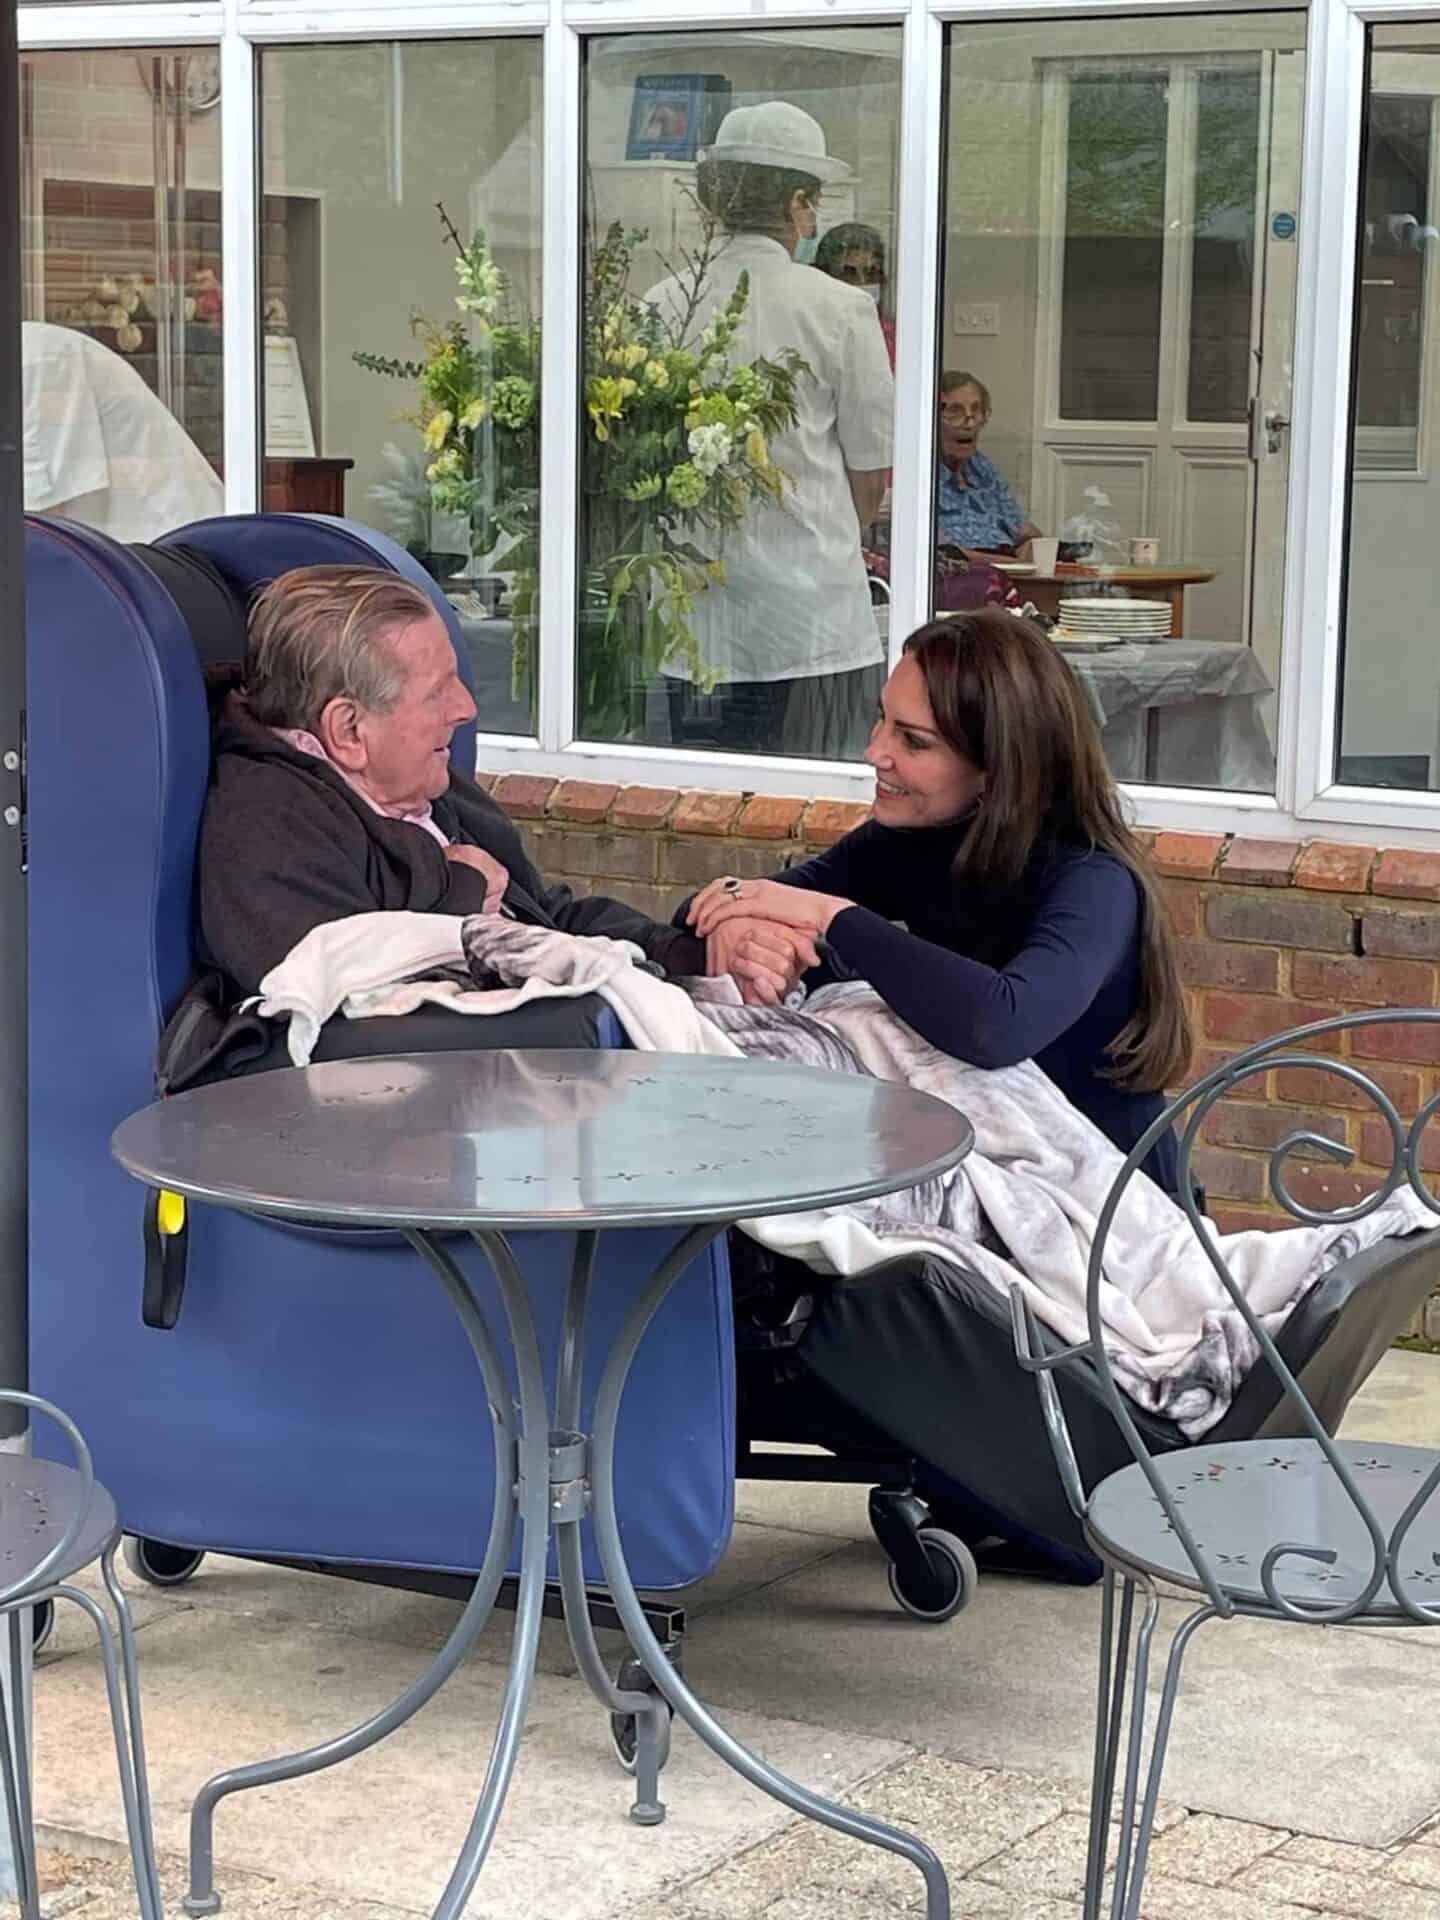 A tender moment between two individuals: an elderly person in a wheelchair and a woman in a navy top, holding hands and engaging in a caring conversation outdoors about choosing a nursing home, with a building and